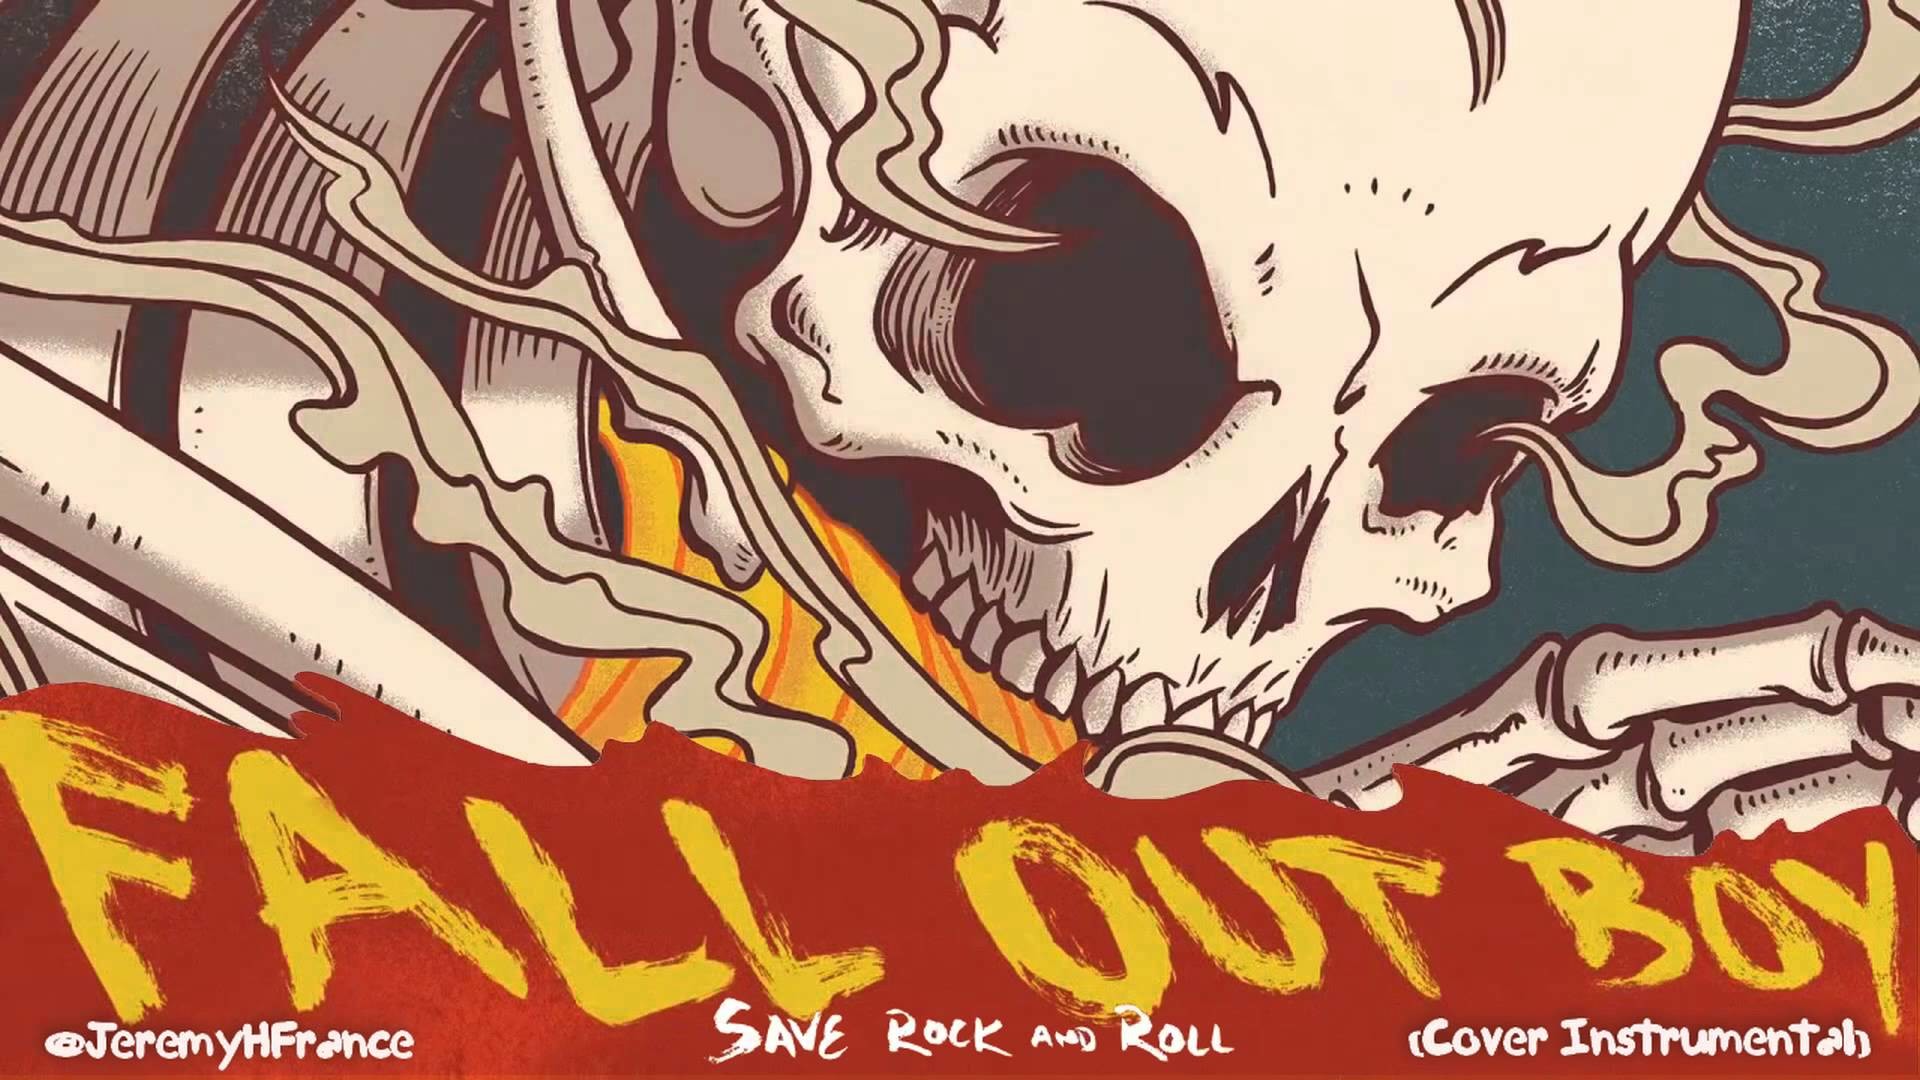 1920x1080 Fall Out Boy - Save Rock and Roll (Instrumental Cover)